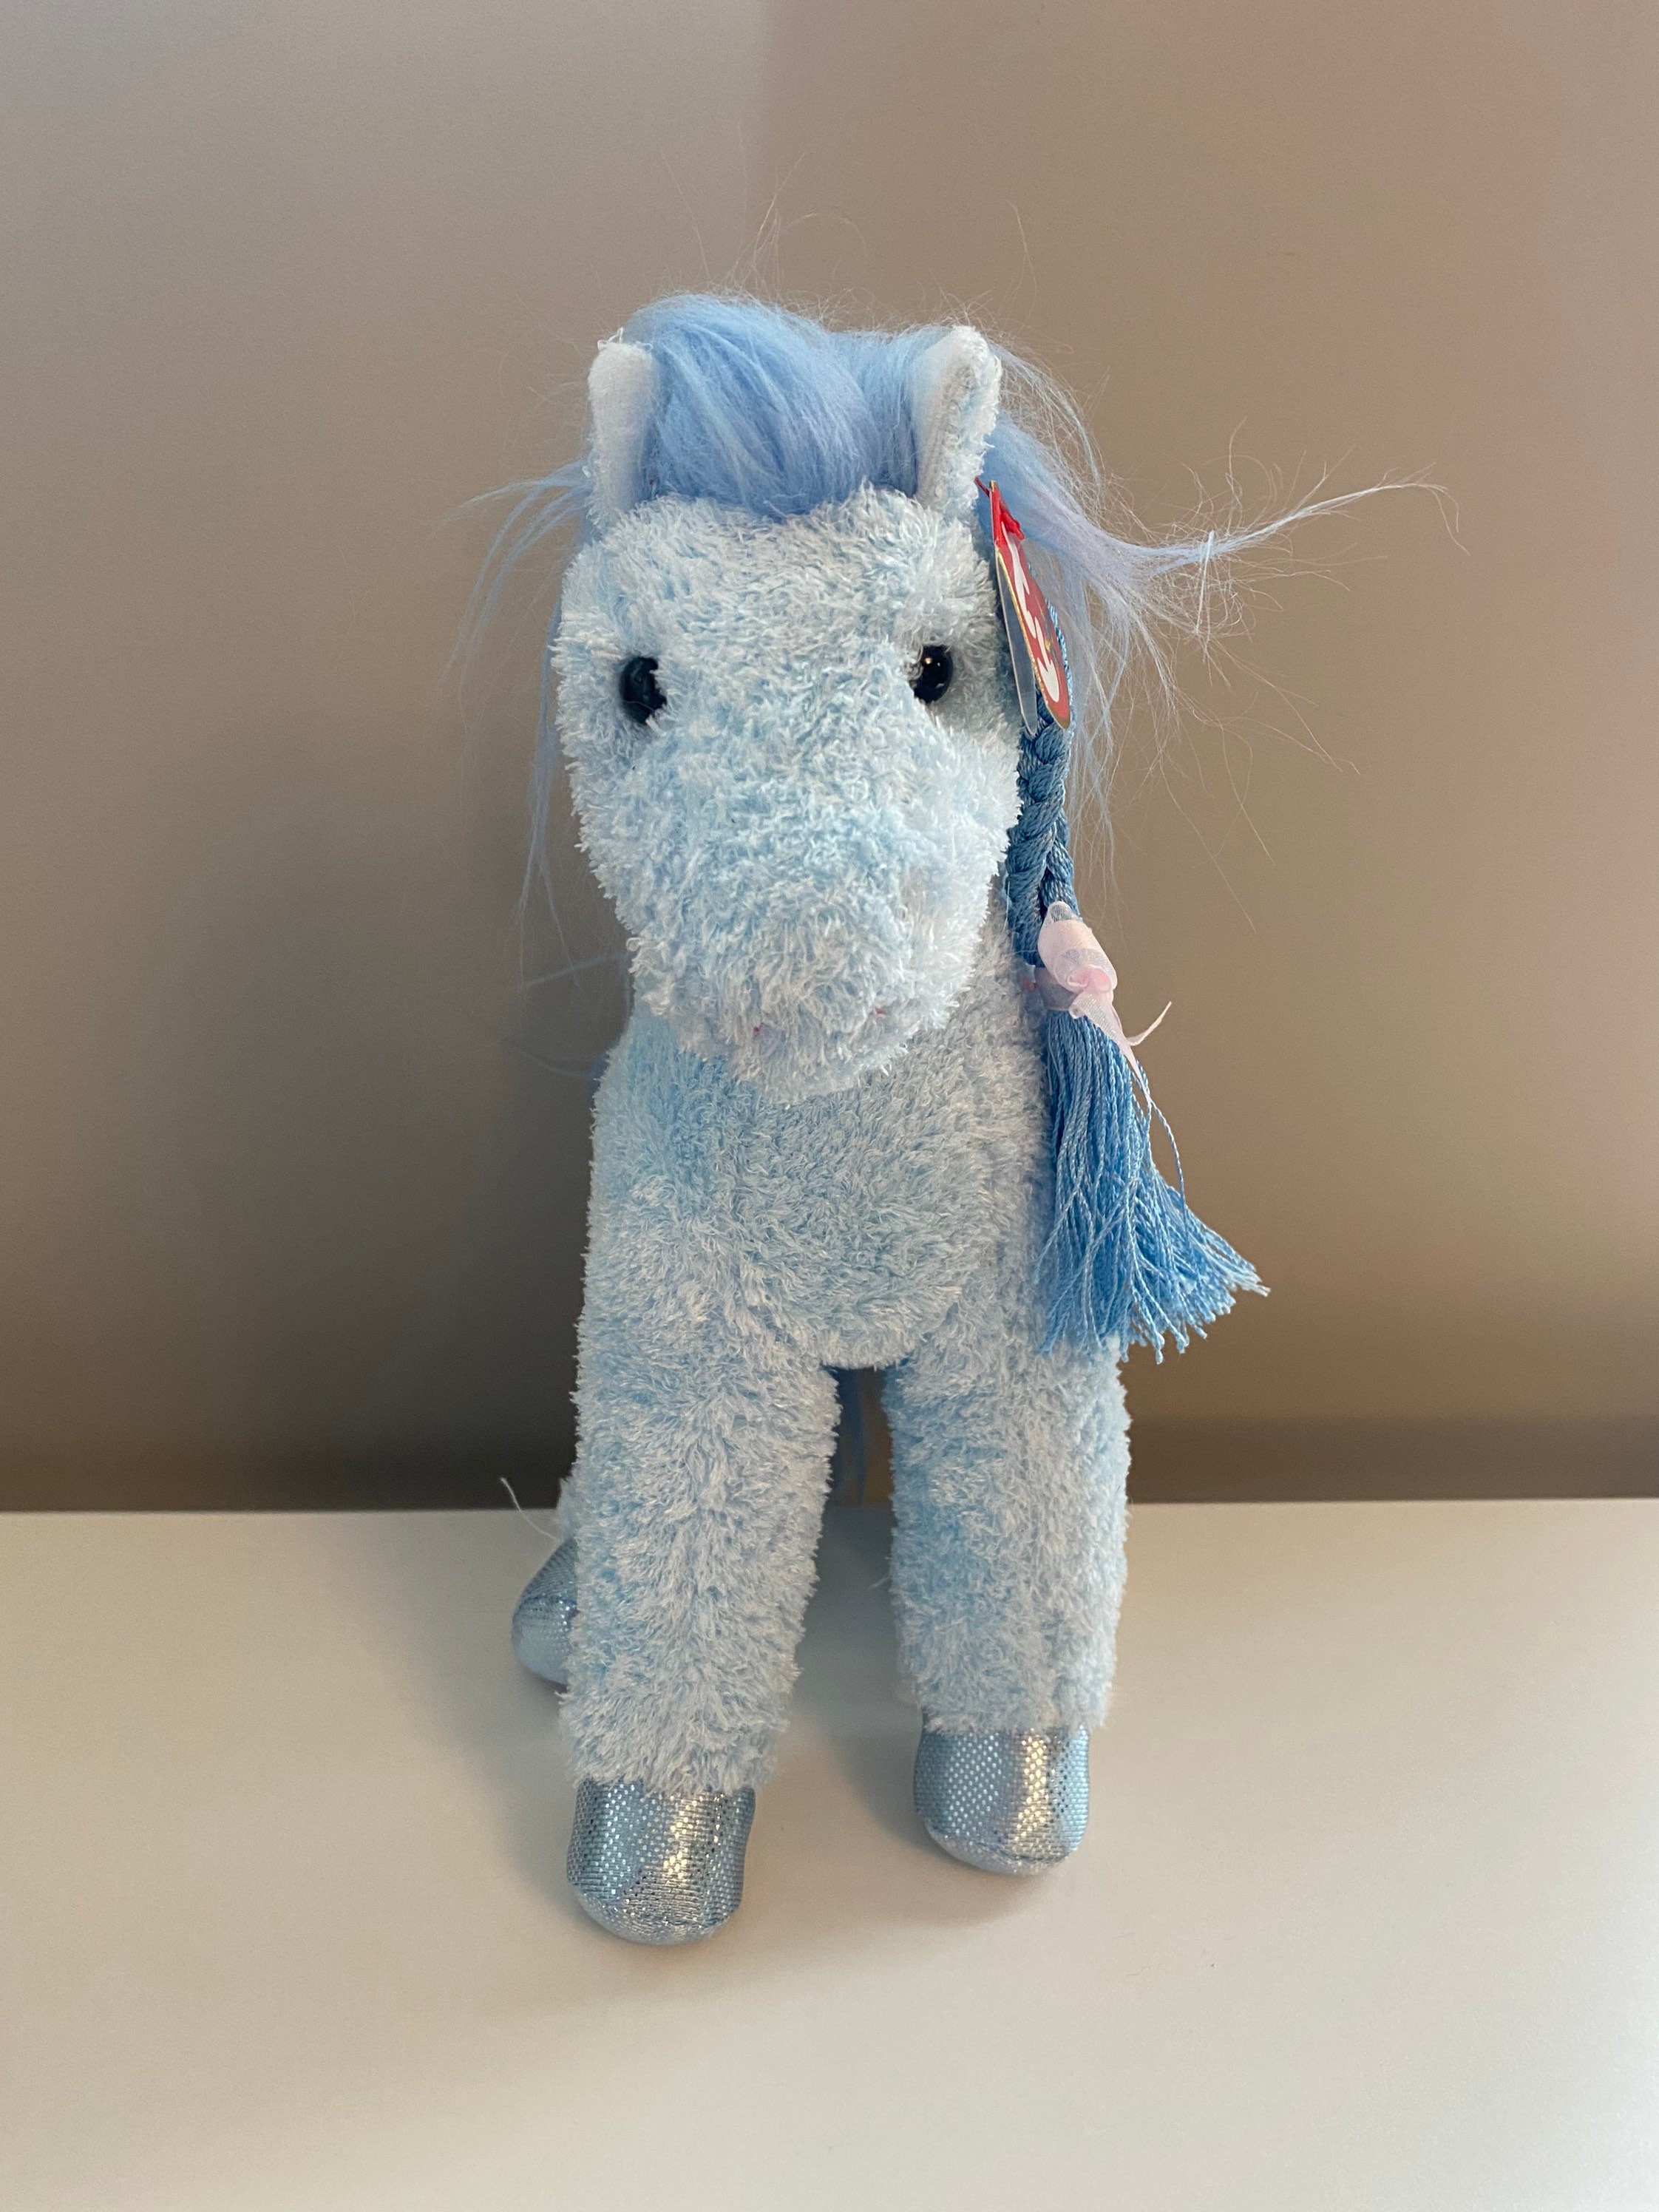 Charming Retired 2005 Ty Beanie Babie 7in Blue Plush Horse With Braids 3up 40314 for sale online 